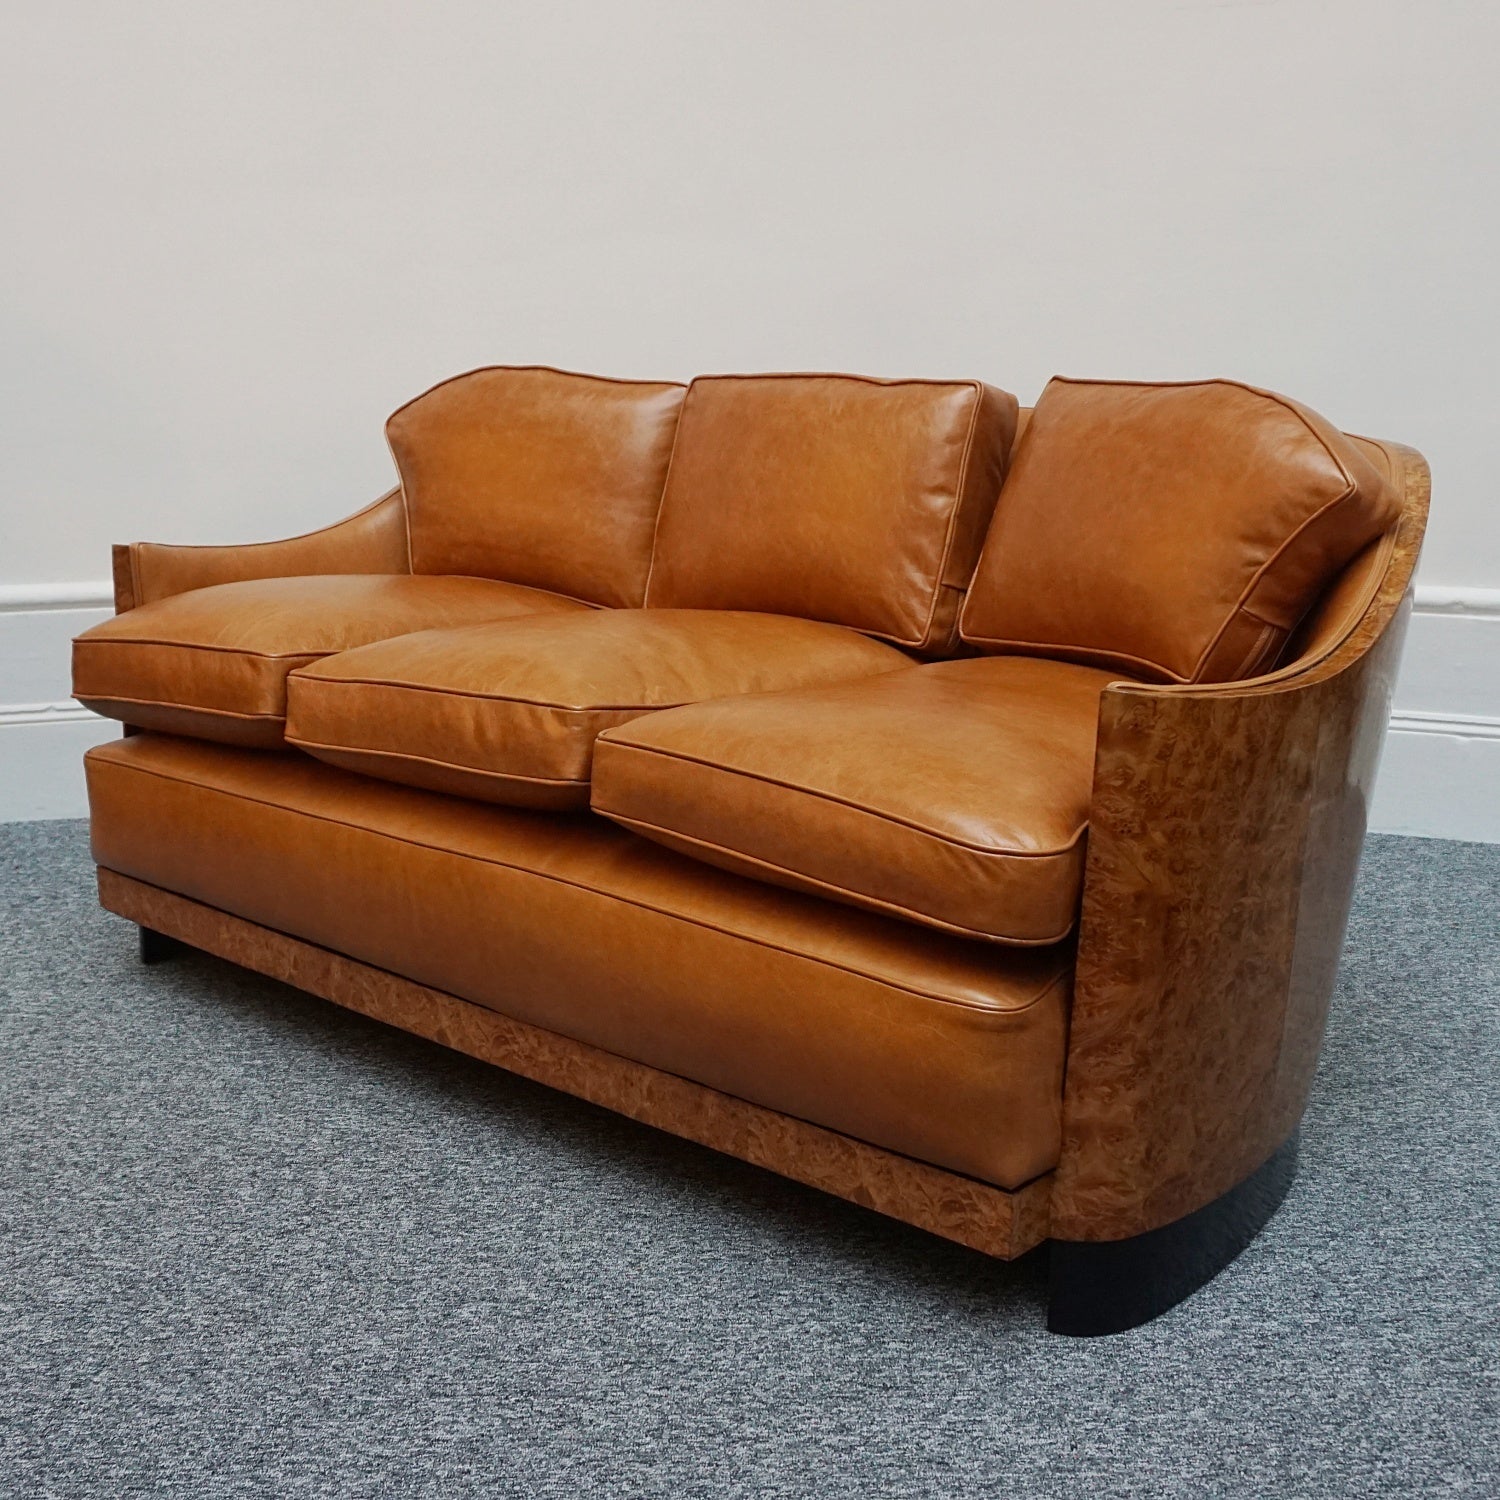 Art Deco club sofa by Maurice Adams. Curved wraparound burr walnut veneer with ebonized banding. Re-upholstered in brown leather. Depth measured with and without optional back cushions. 

Dimensions: H 76cm W 169cm D 98cm Seat H 54cm W 150cm D